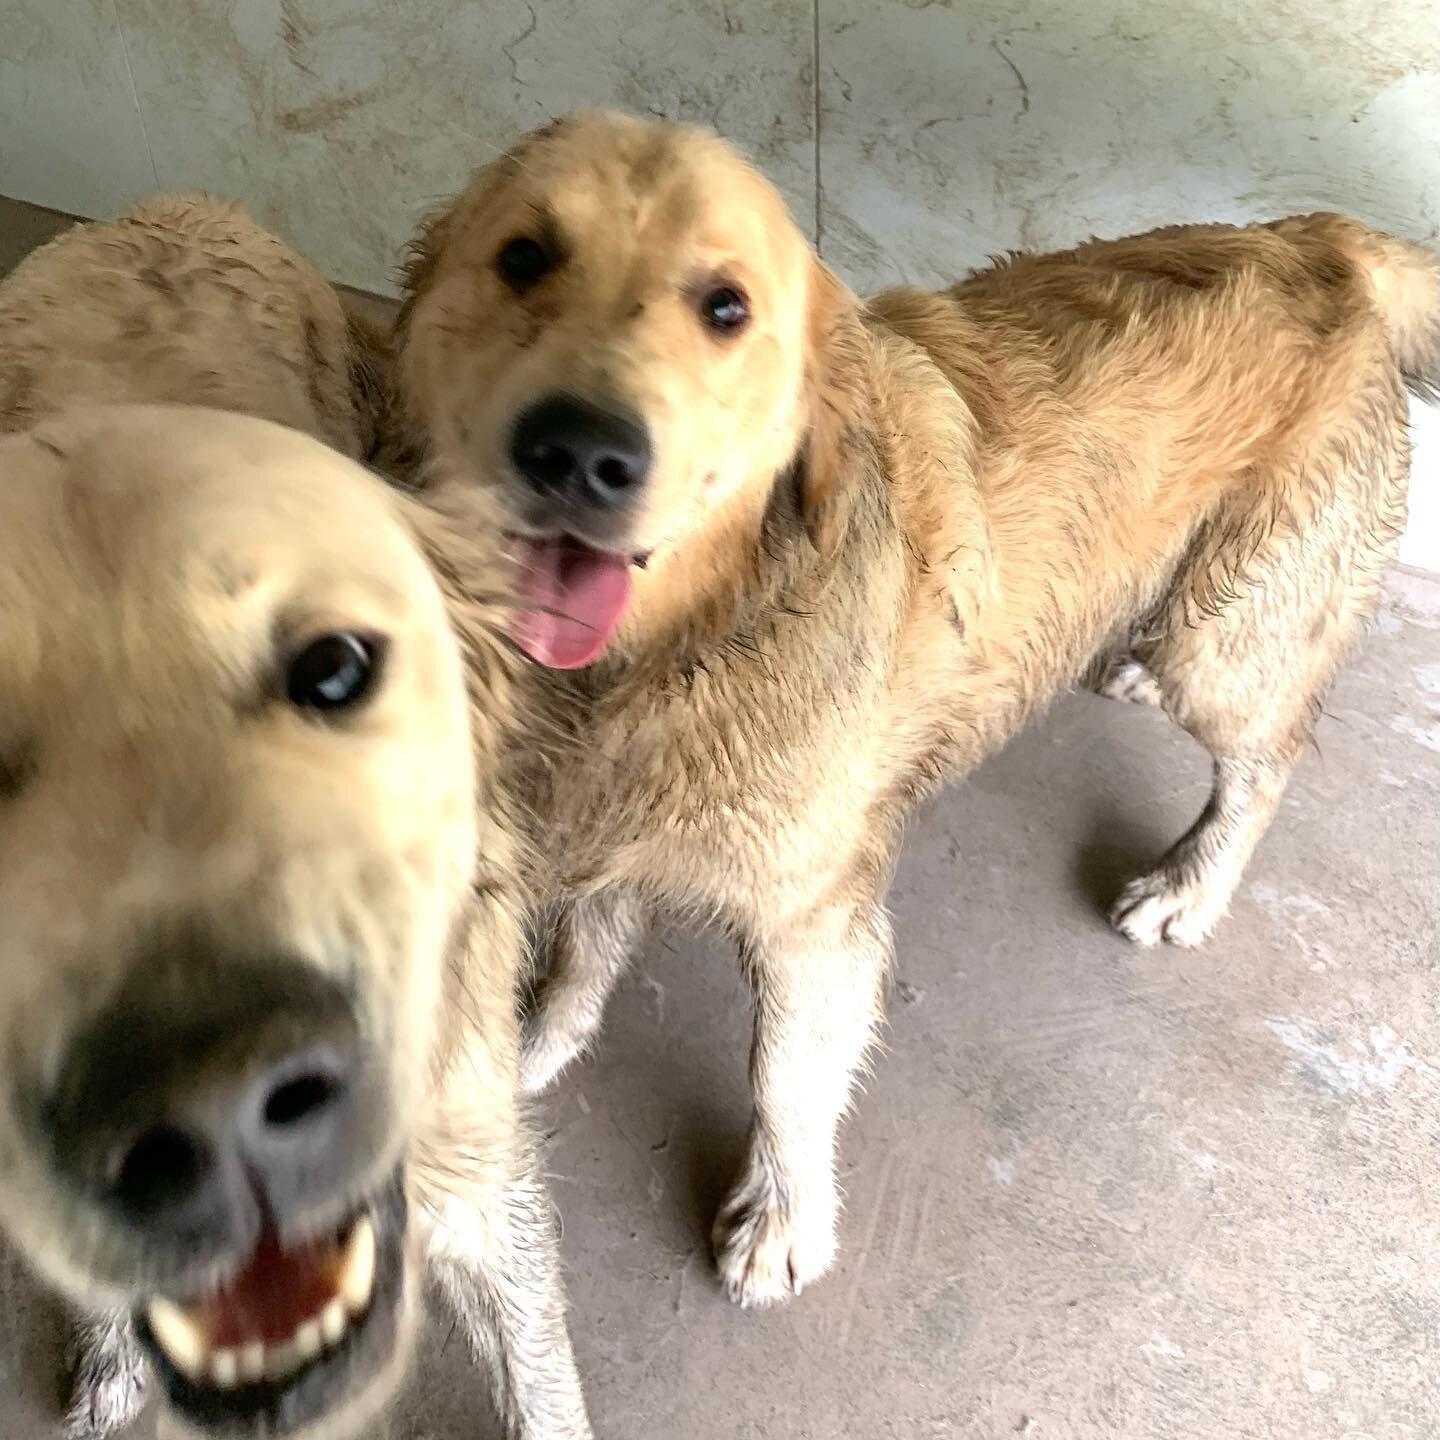 Their room was pristinely clean 3 minutes earlier.  Lucas and Huxley enjoy wrestling in puddles.  Bath time!! #goldenretriever #constantcleaning #bedsfortails #muddydogs #bathtime #dogbath